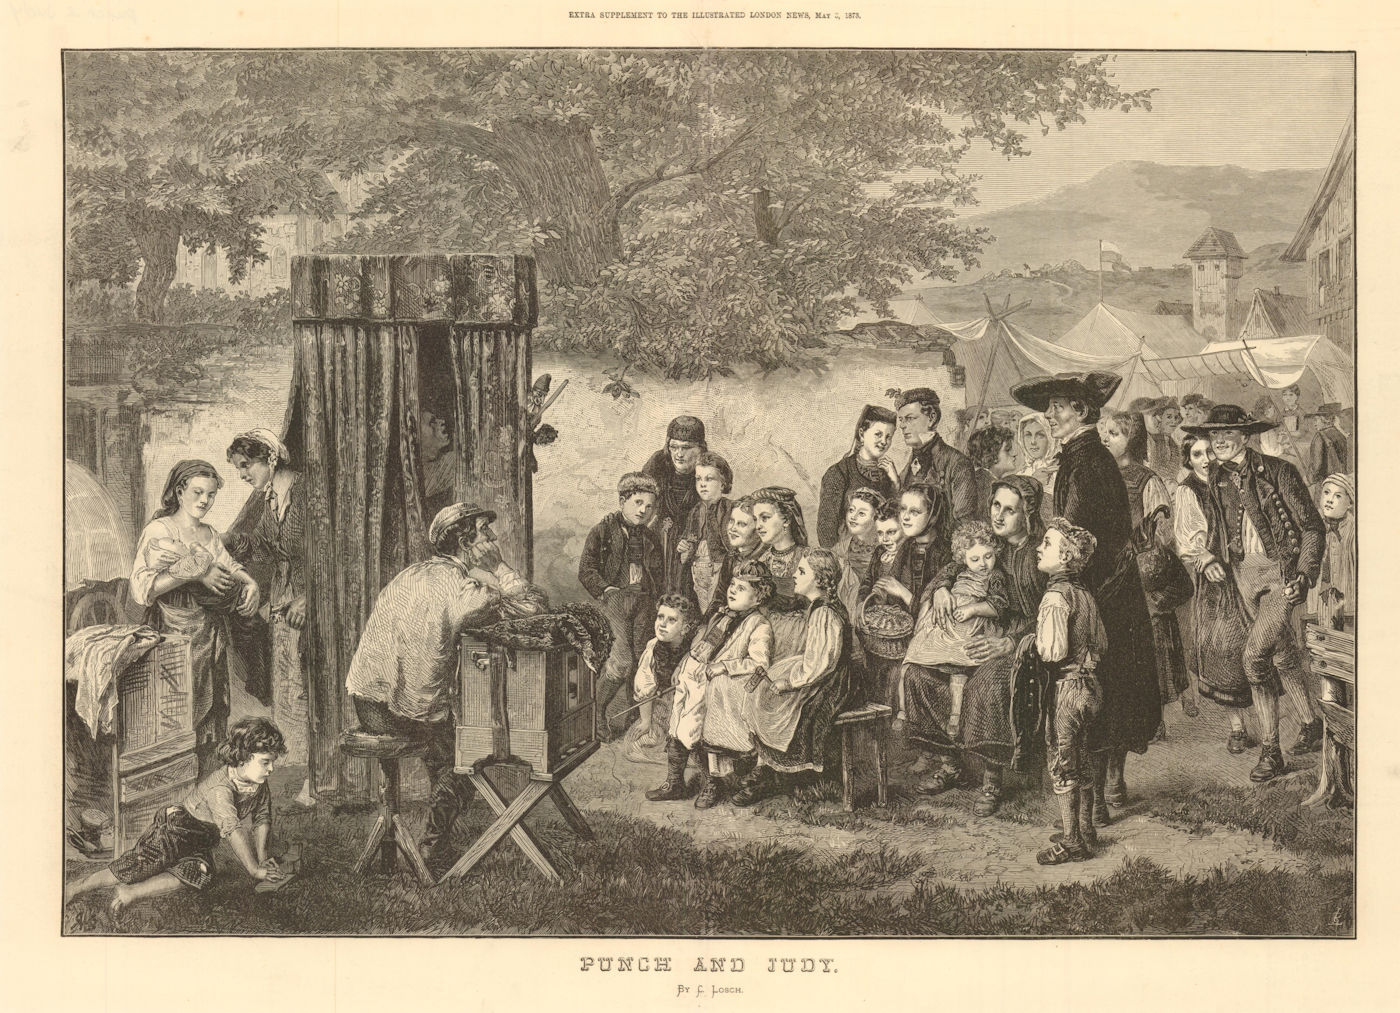 A Punch & Judy show by C. Losch. Performing Arts. Children 1873 old print